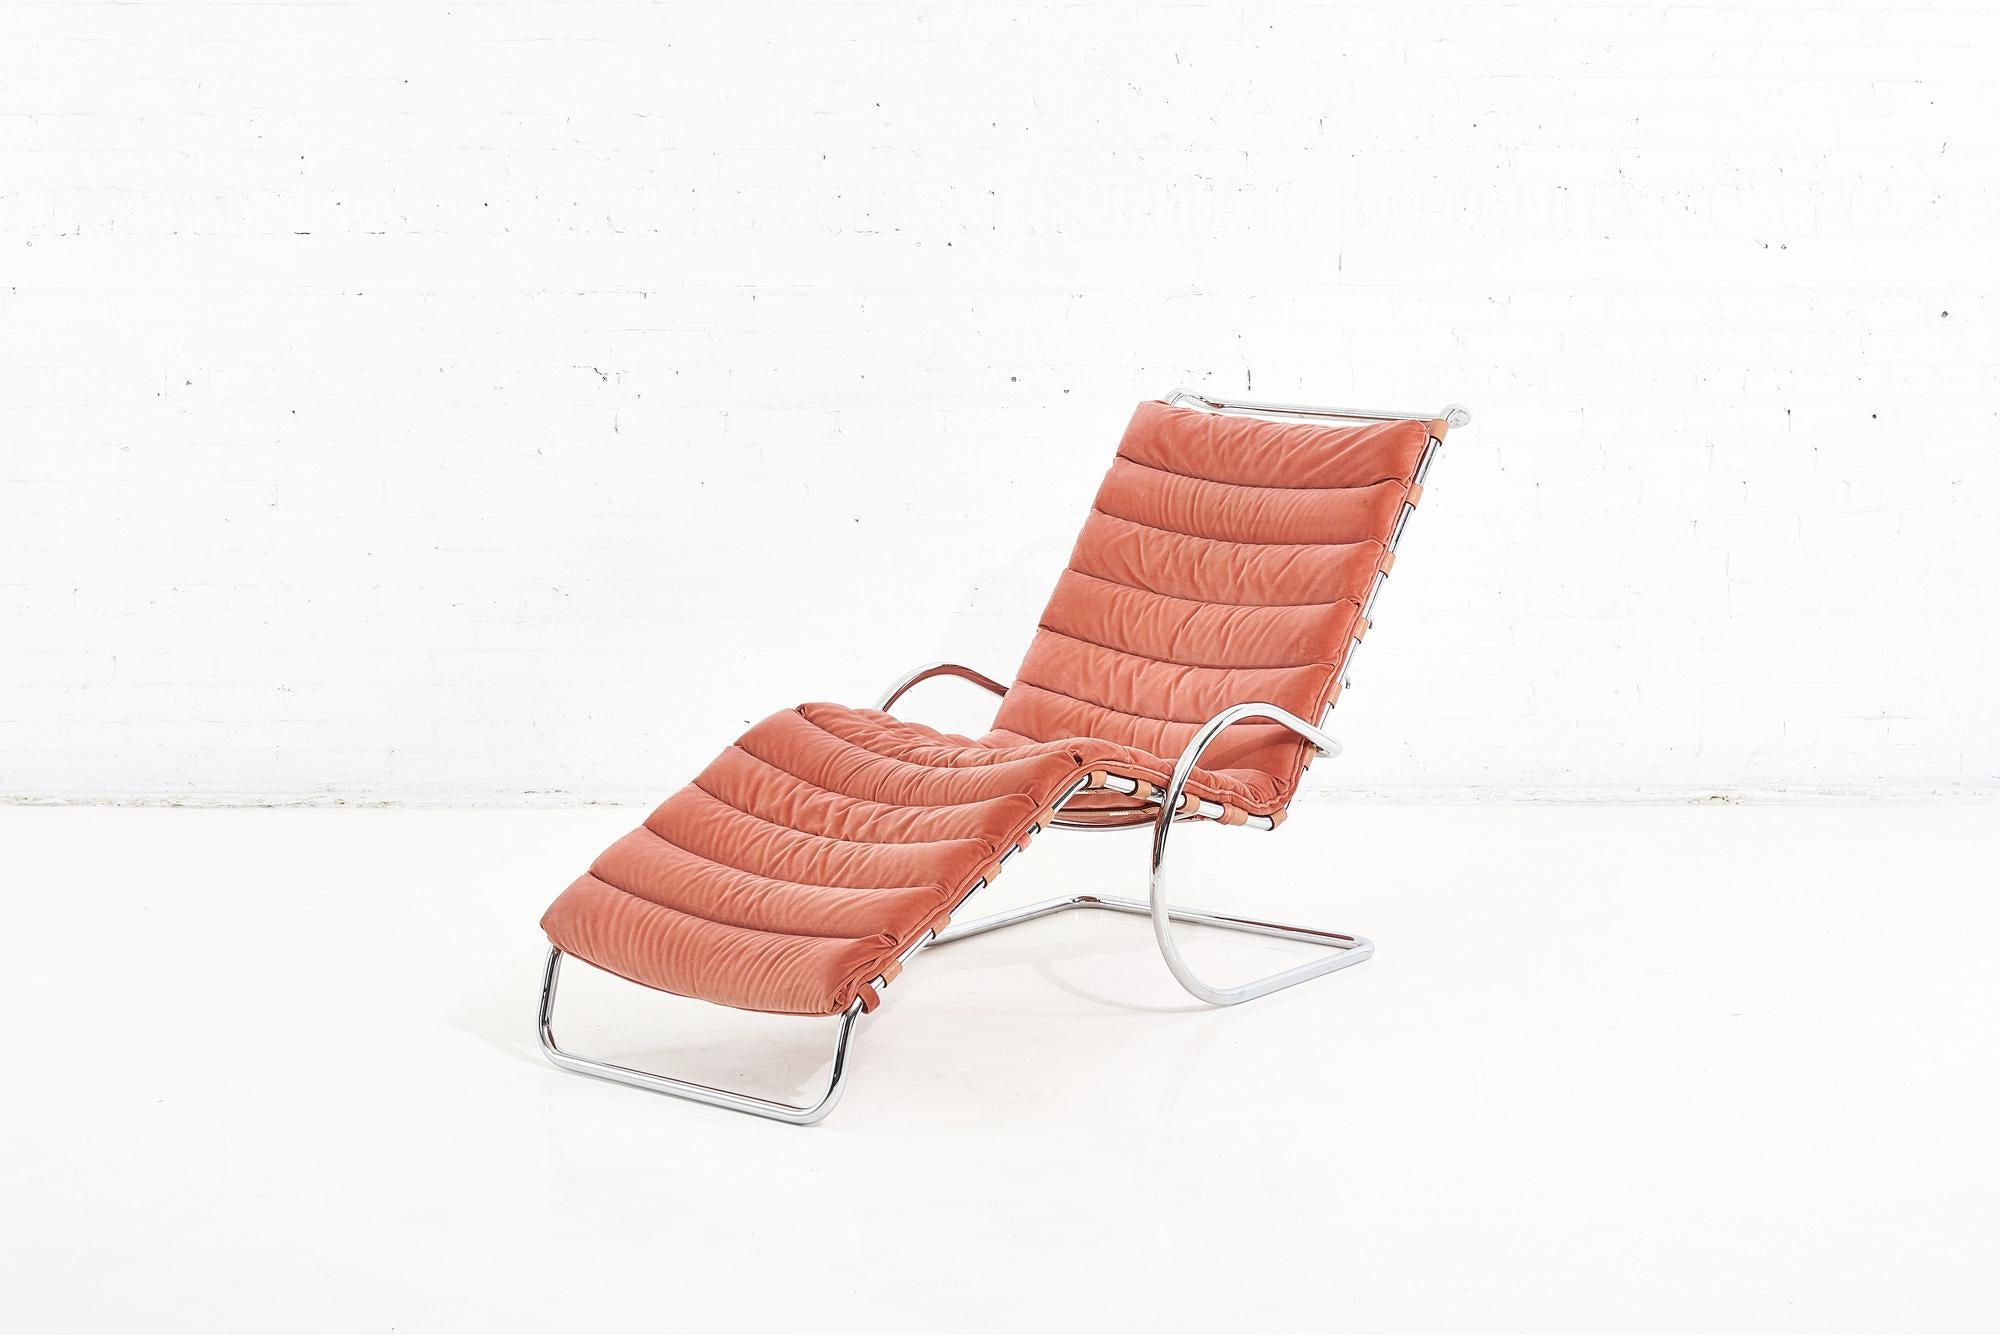 Chrome Ludwig Mies van der Rohe Mr Adjustable Chaise, Knoll, 1980 For Sale